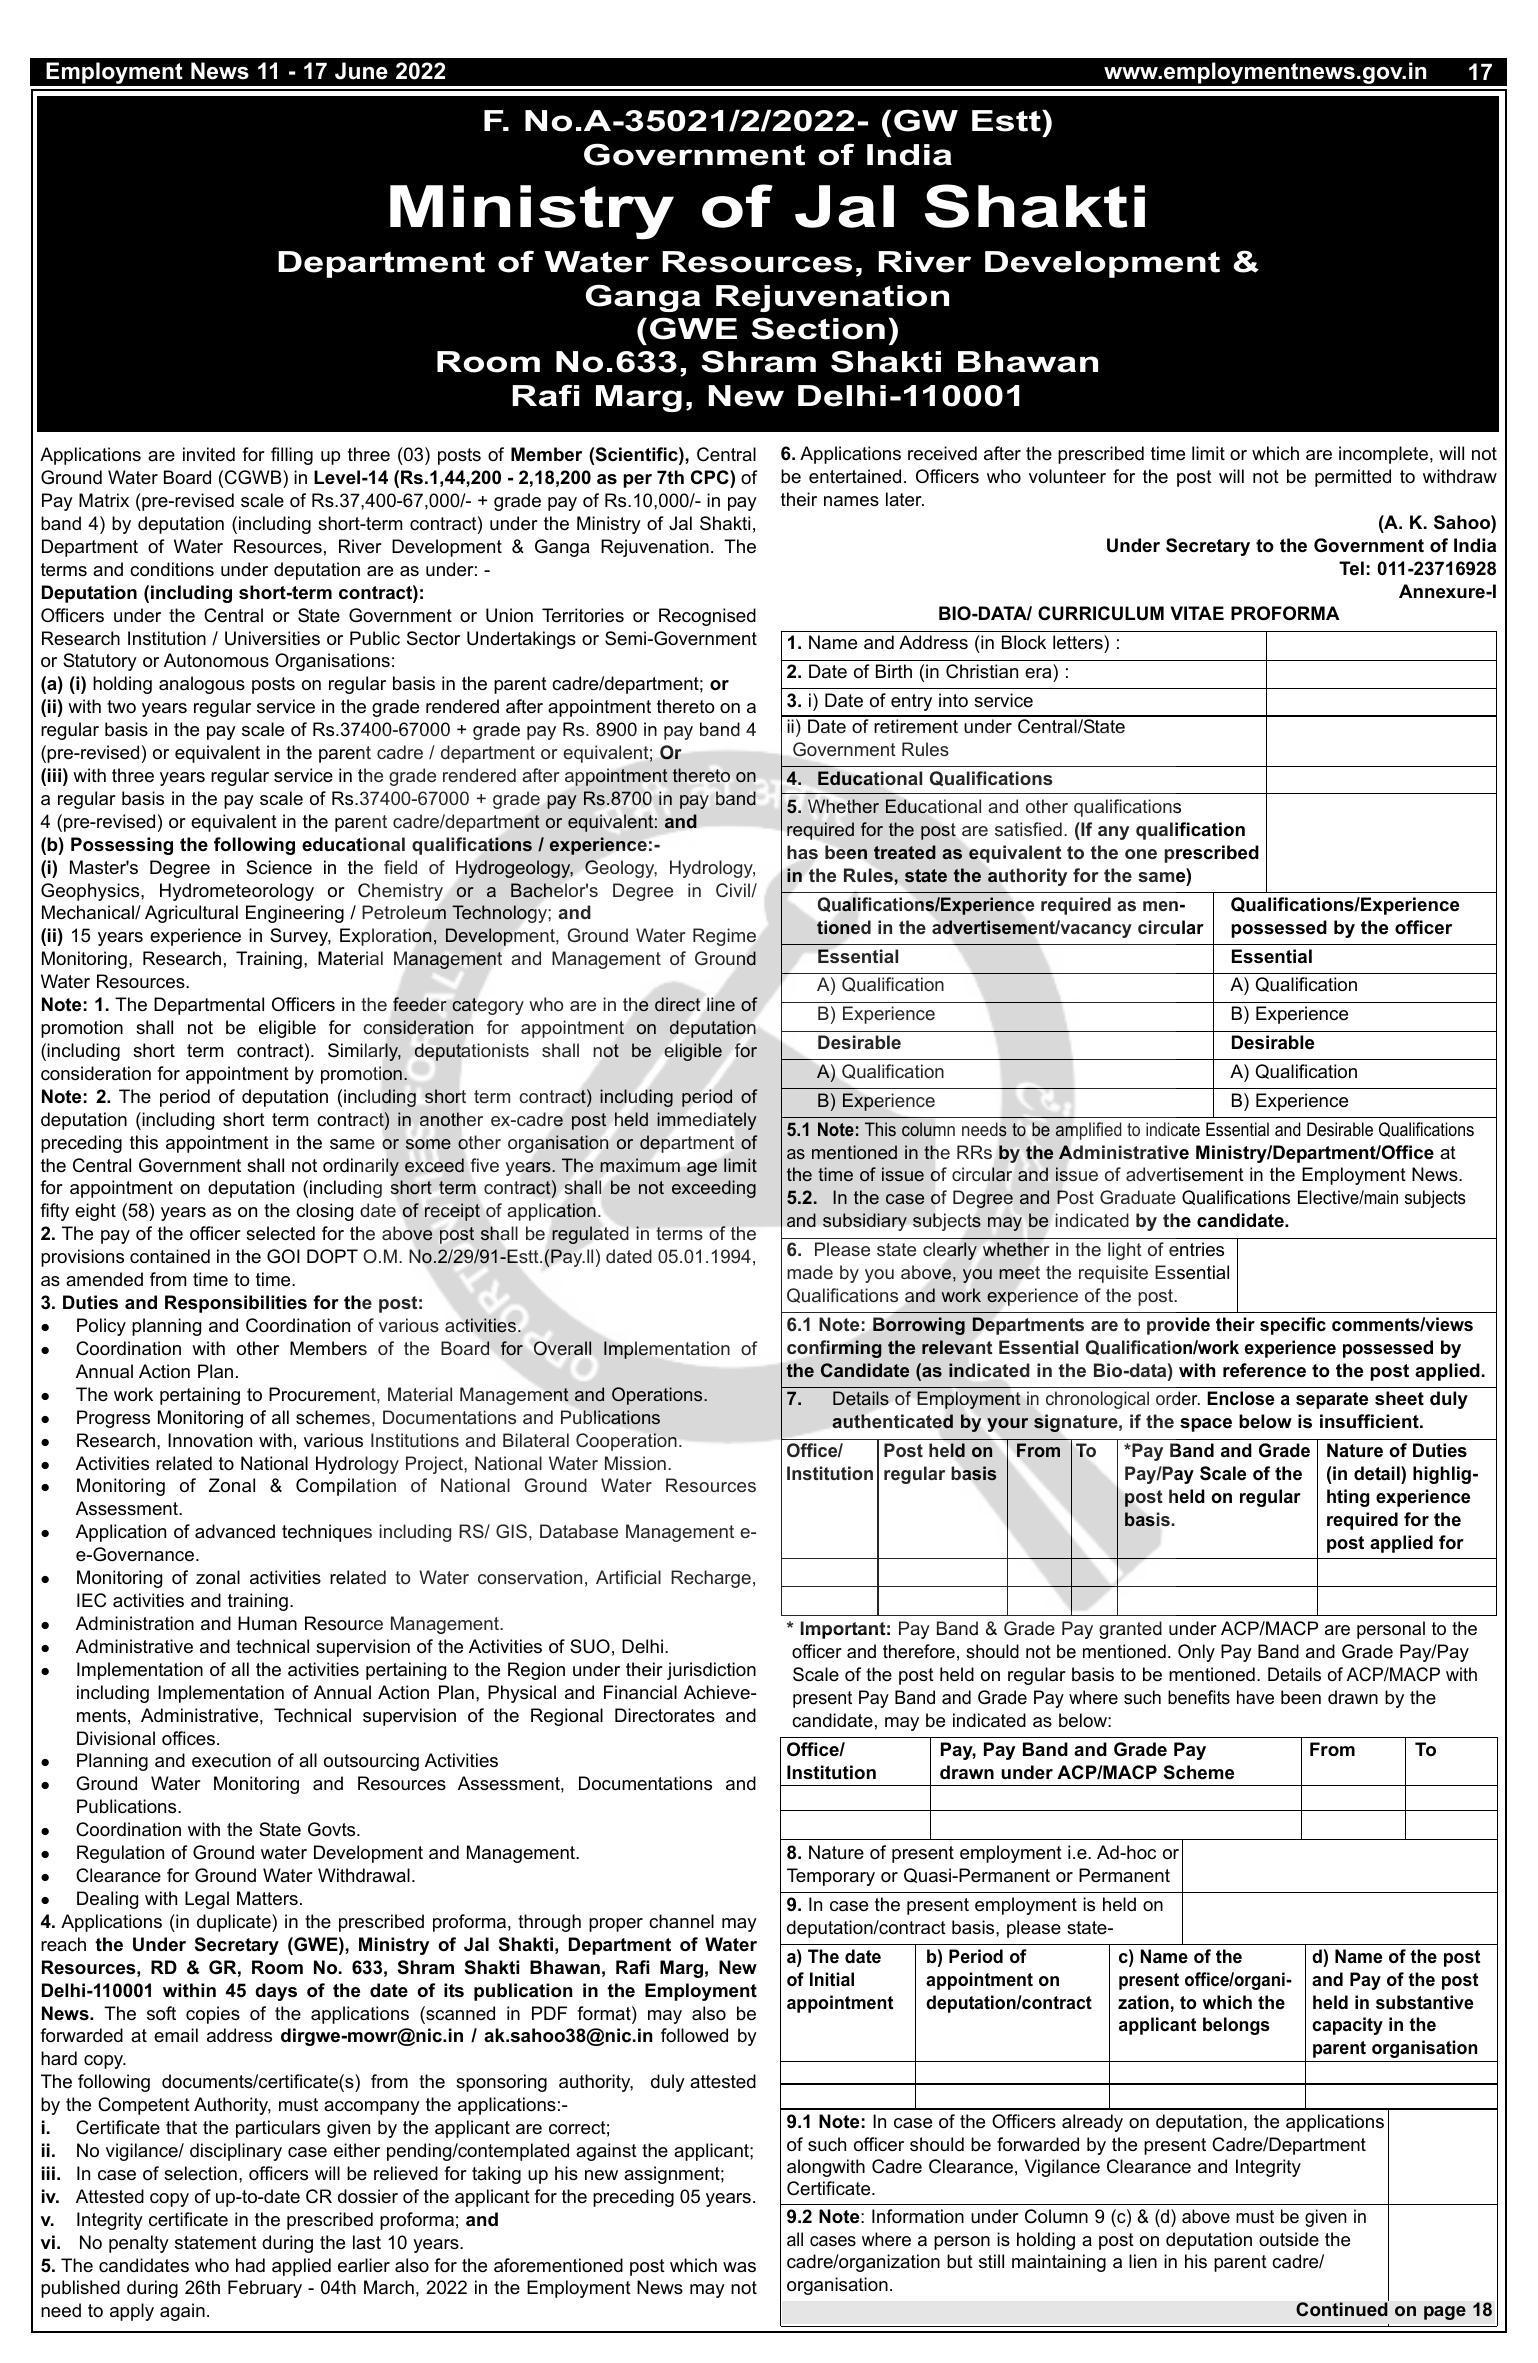 Central Ground Water Board (CGWB) Recruitment 2022 For 3 Member - Page 1